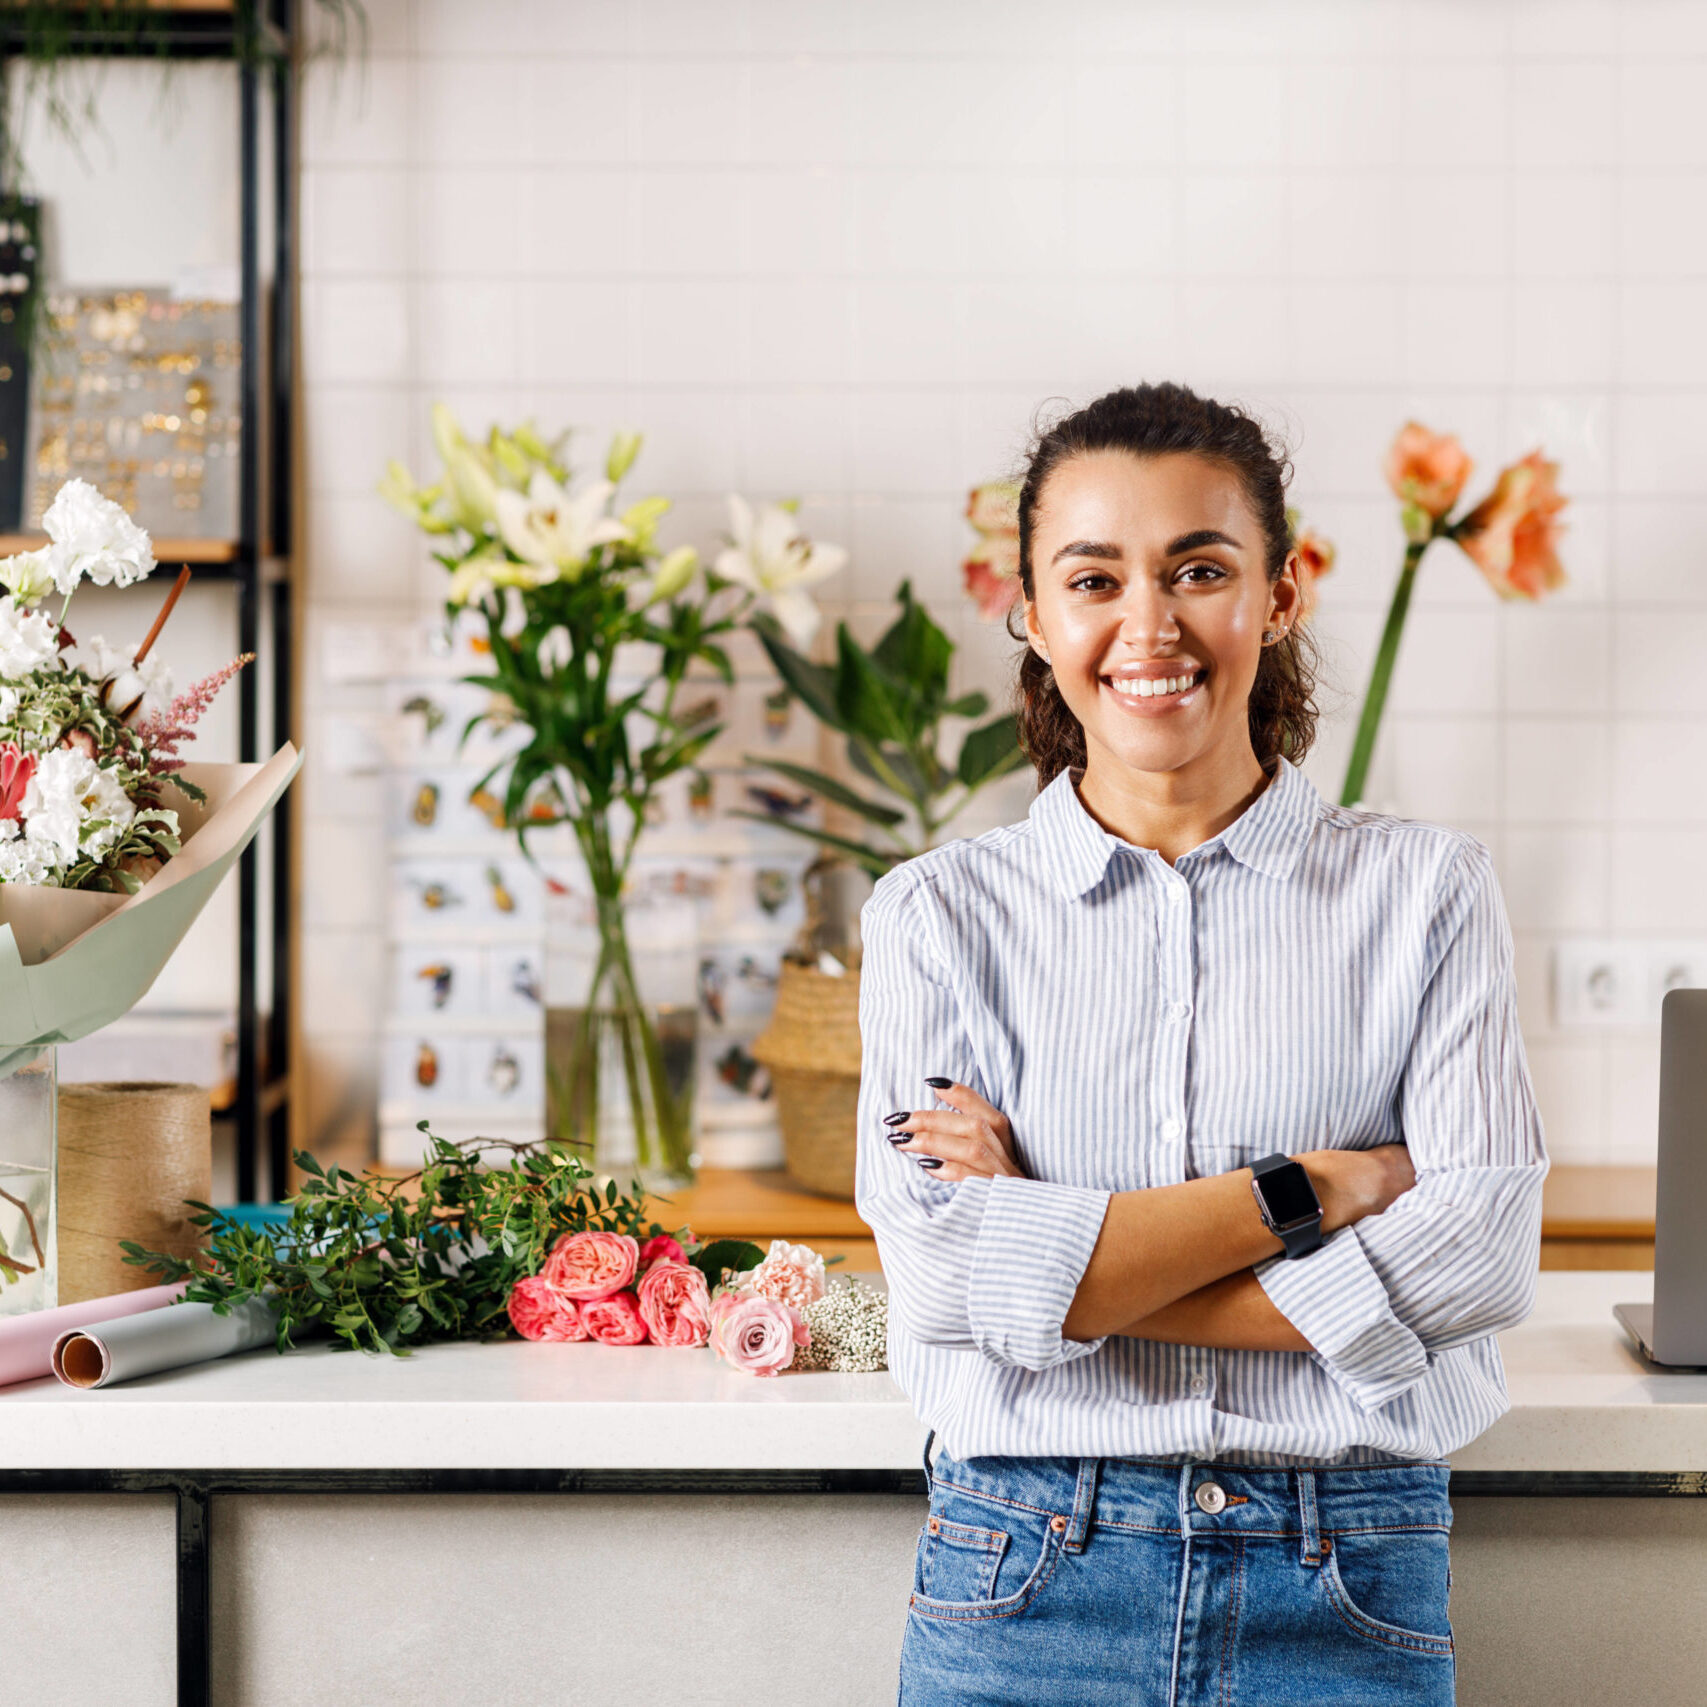 Confident female florist standing with her arms crossed and looking at camera. Happy flower shop owner standing at counter.